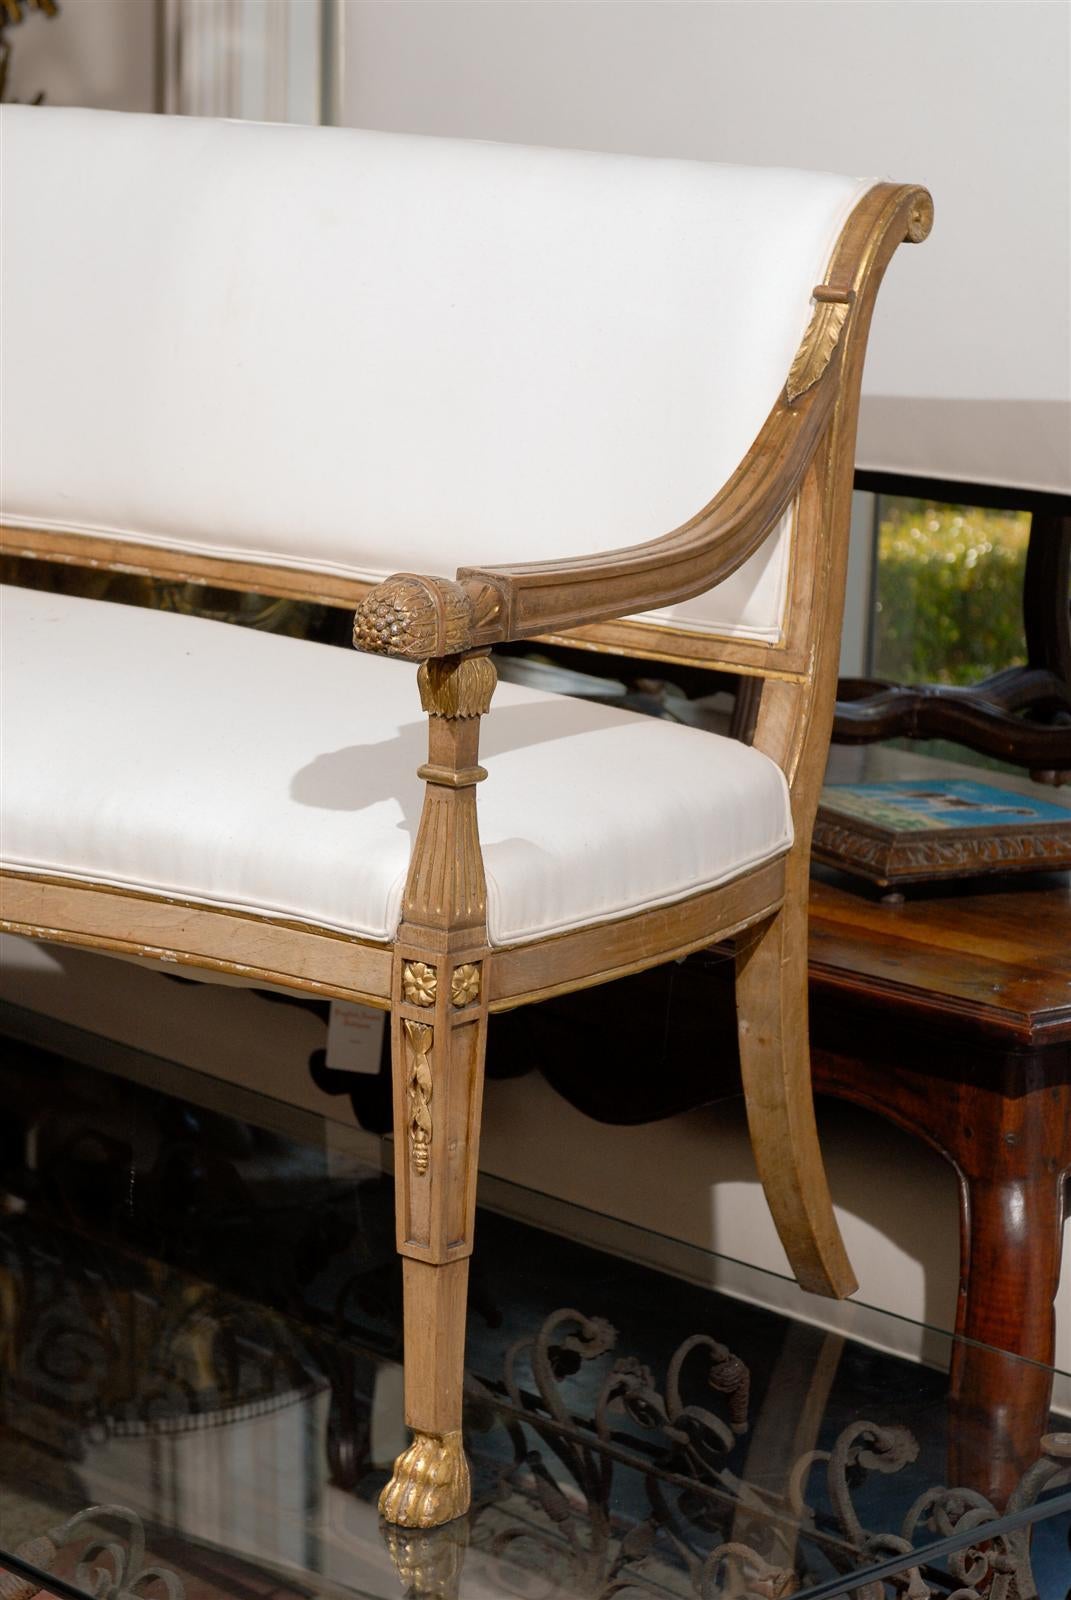 Gilt Turn of the Century Italian Upholstered Wooden Settee with Scrolled Back